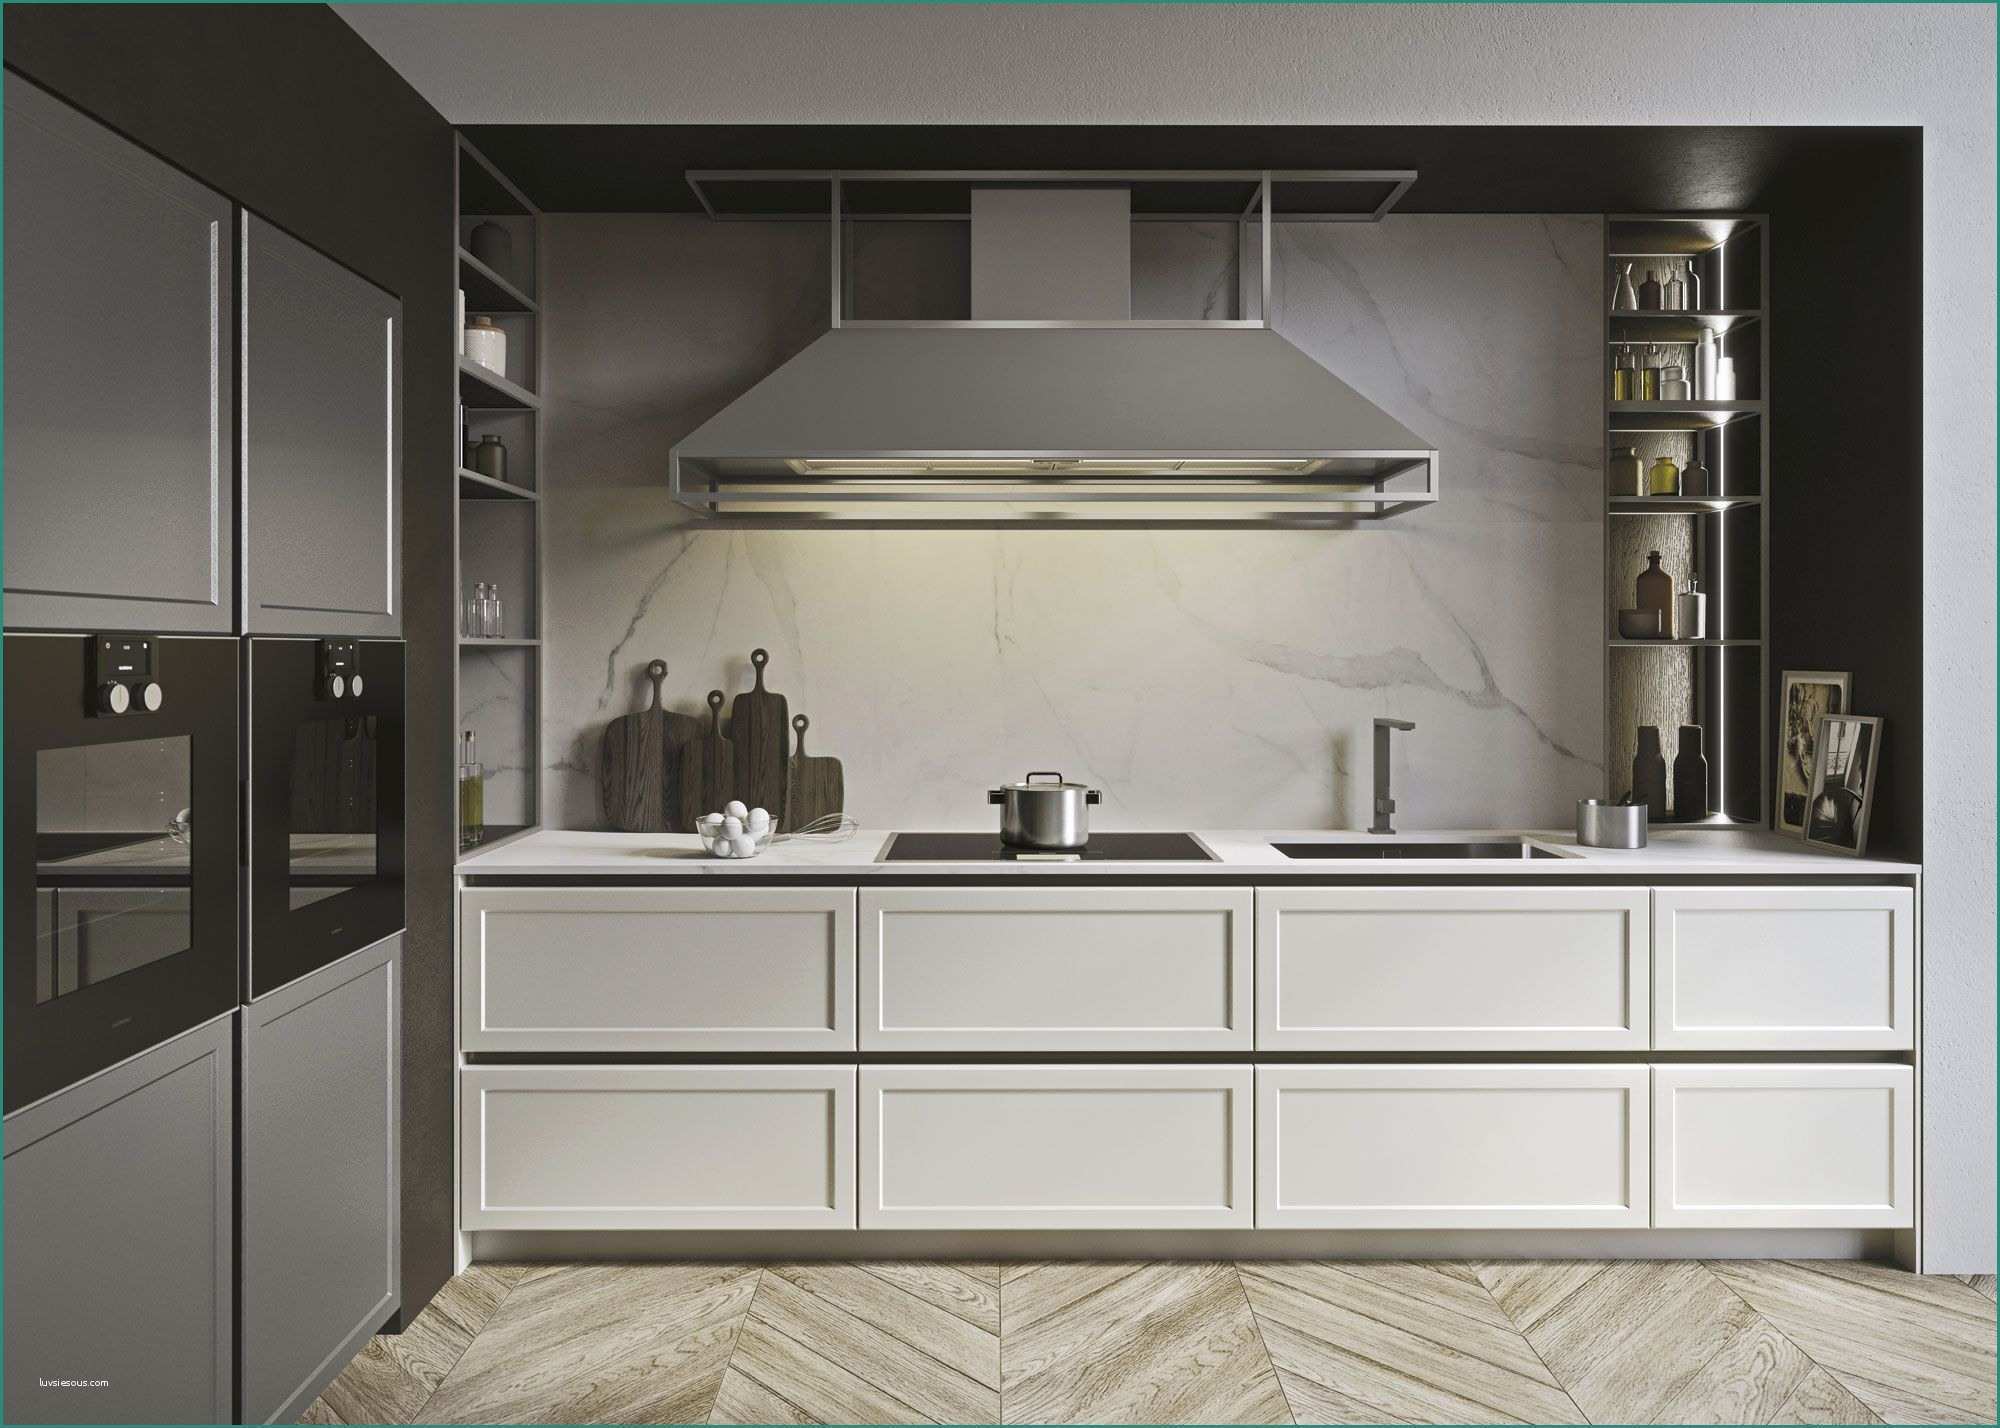 Cucine Berloni Moderne E the Visual Spaciousness and Lightness In the Kitchen Can Be Achieved